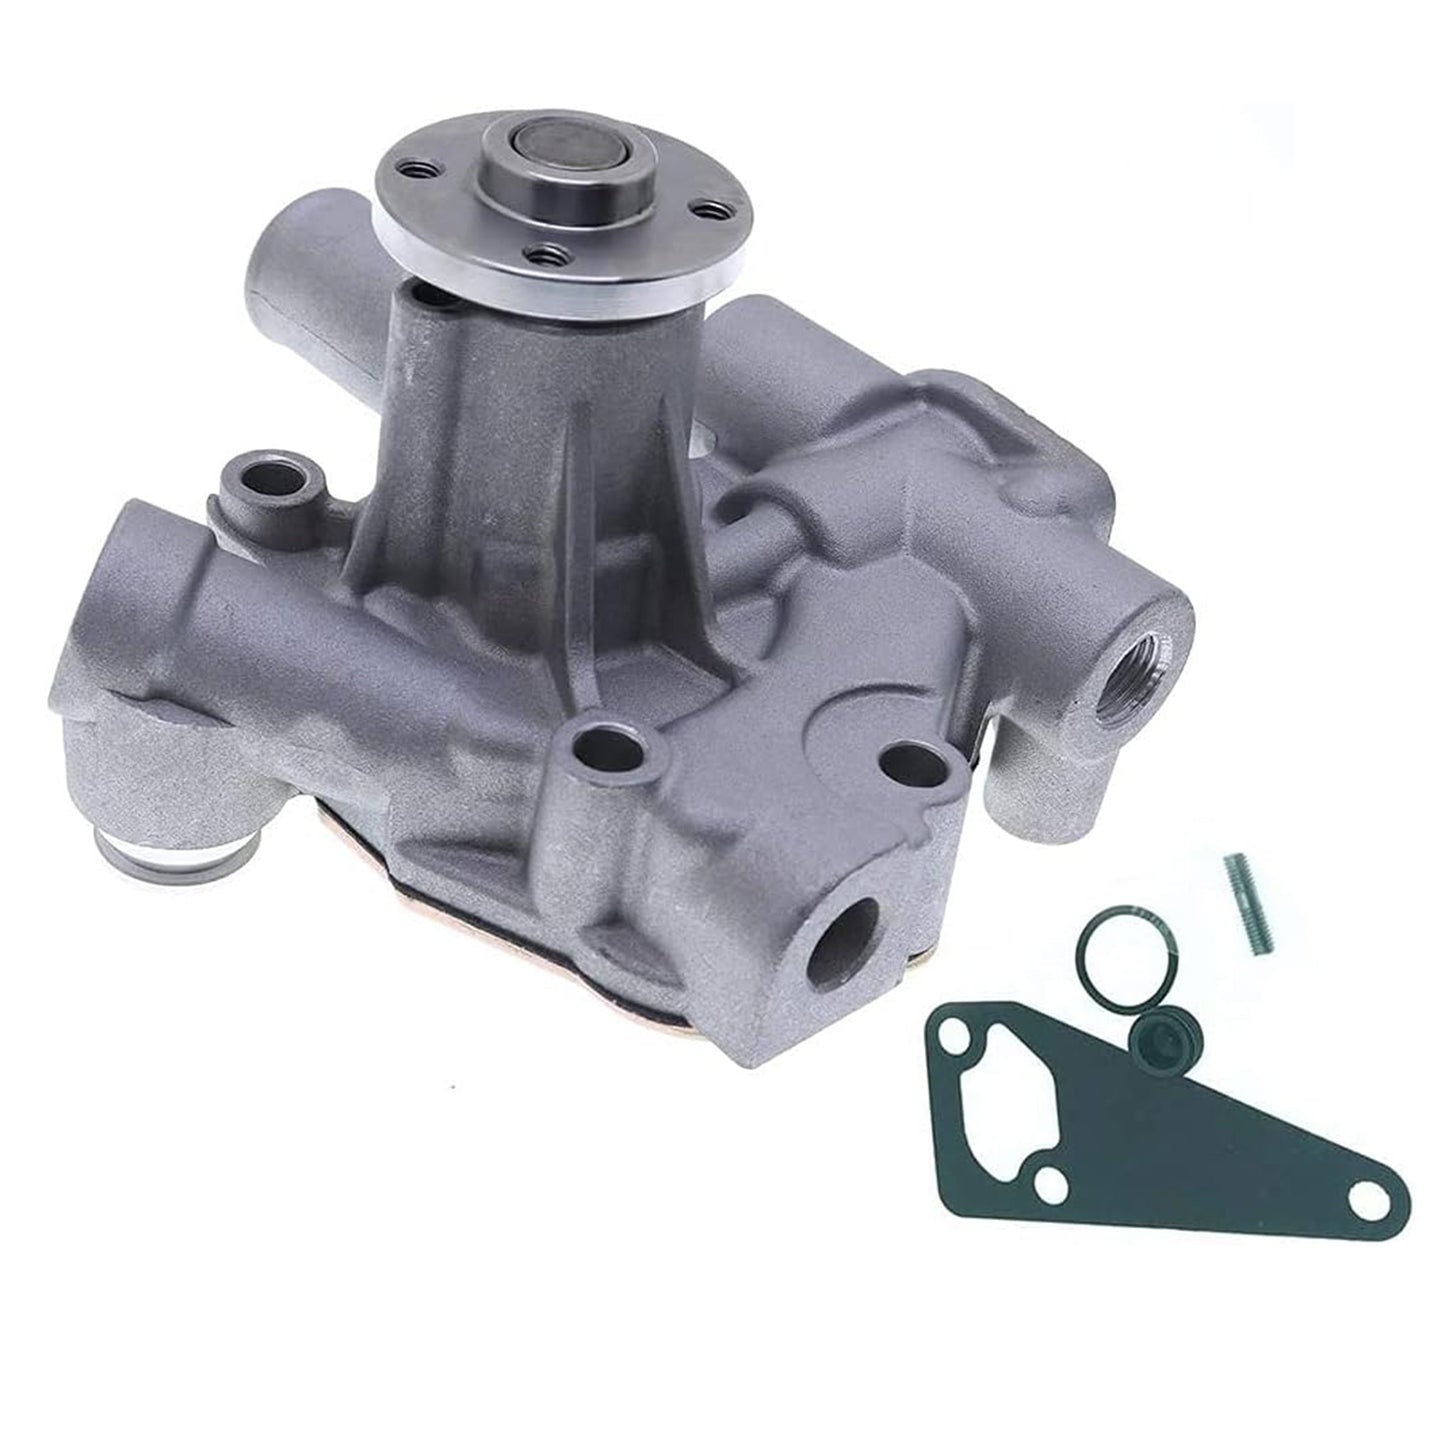 119260-42002 Water Pump with Gasket Compatible With Komatsu 2D68E 3D68 Yanmar 3TN66